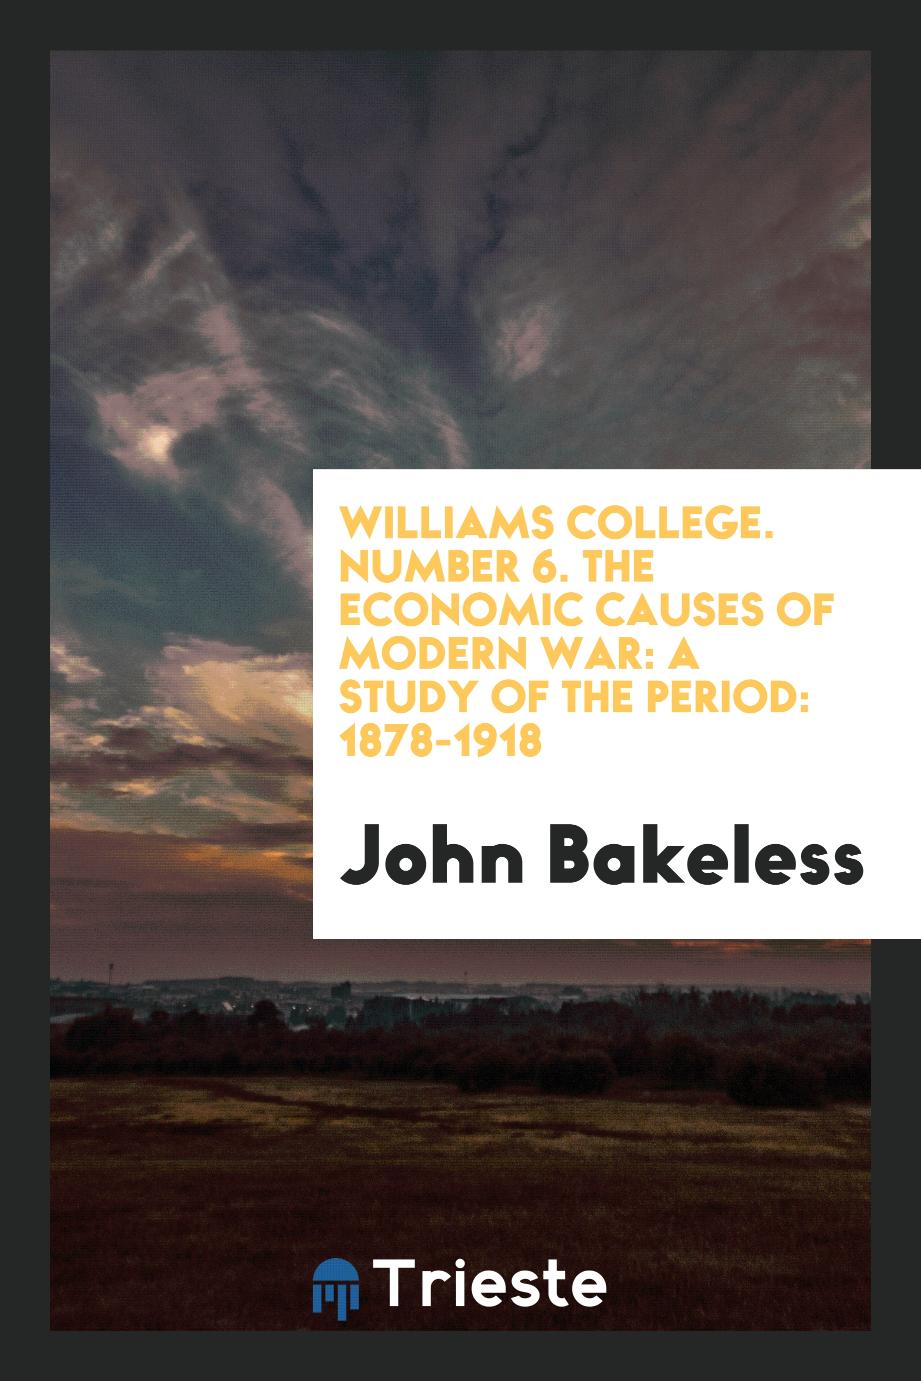 Williams College. Number 6. The Economic Causes of Modern War: A Study of the Period: 1878-1918